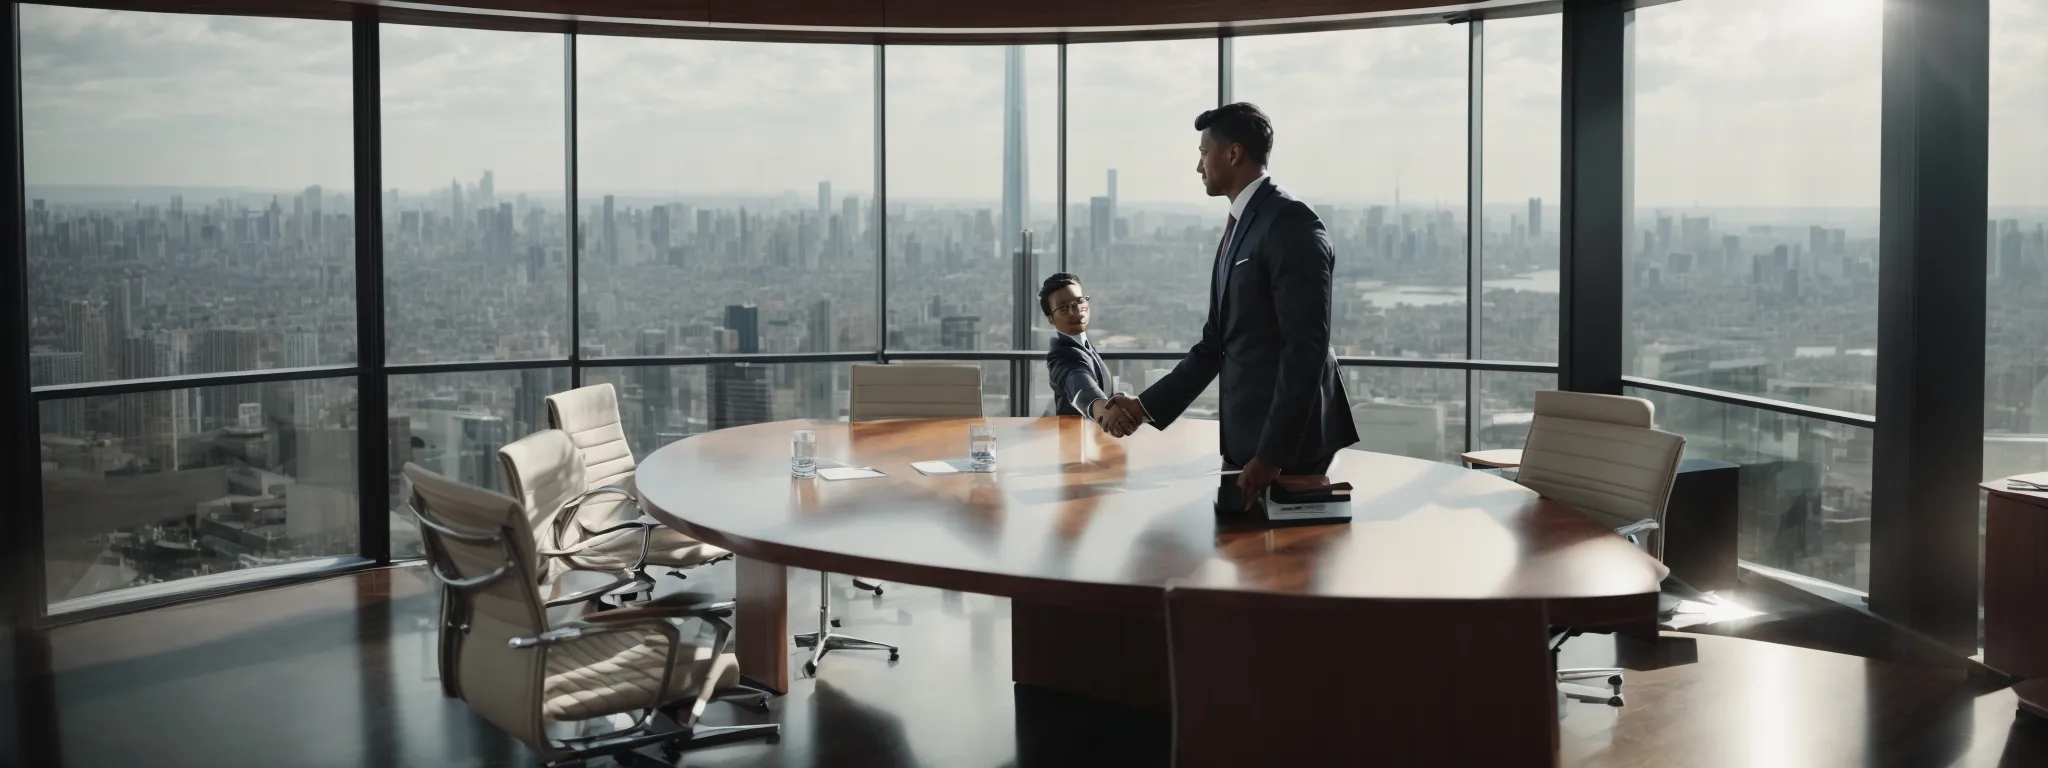 two corporate professionals shake hands in a sleek boardroom overlooking a panoramic cityscape symbolizing an international business agreement.